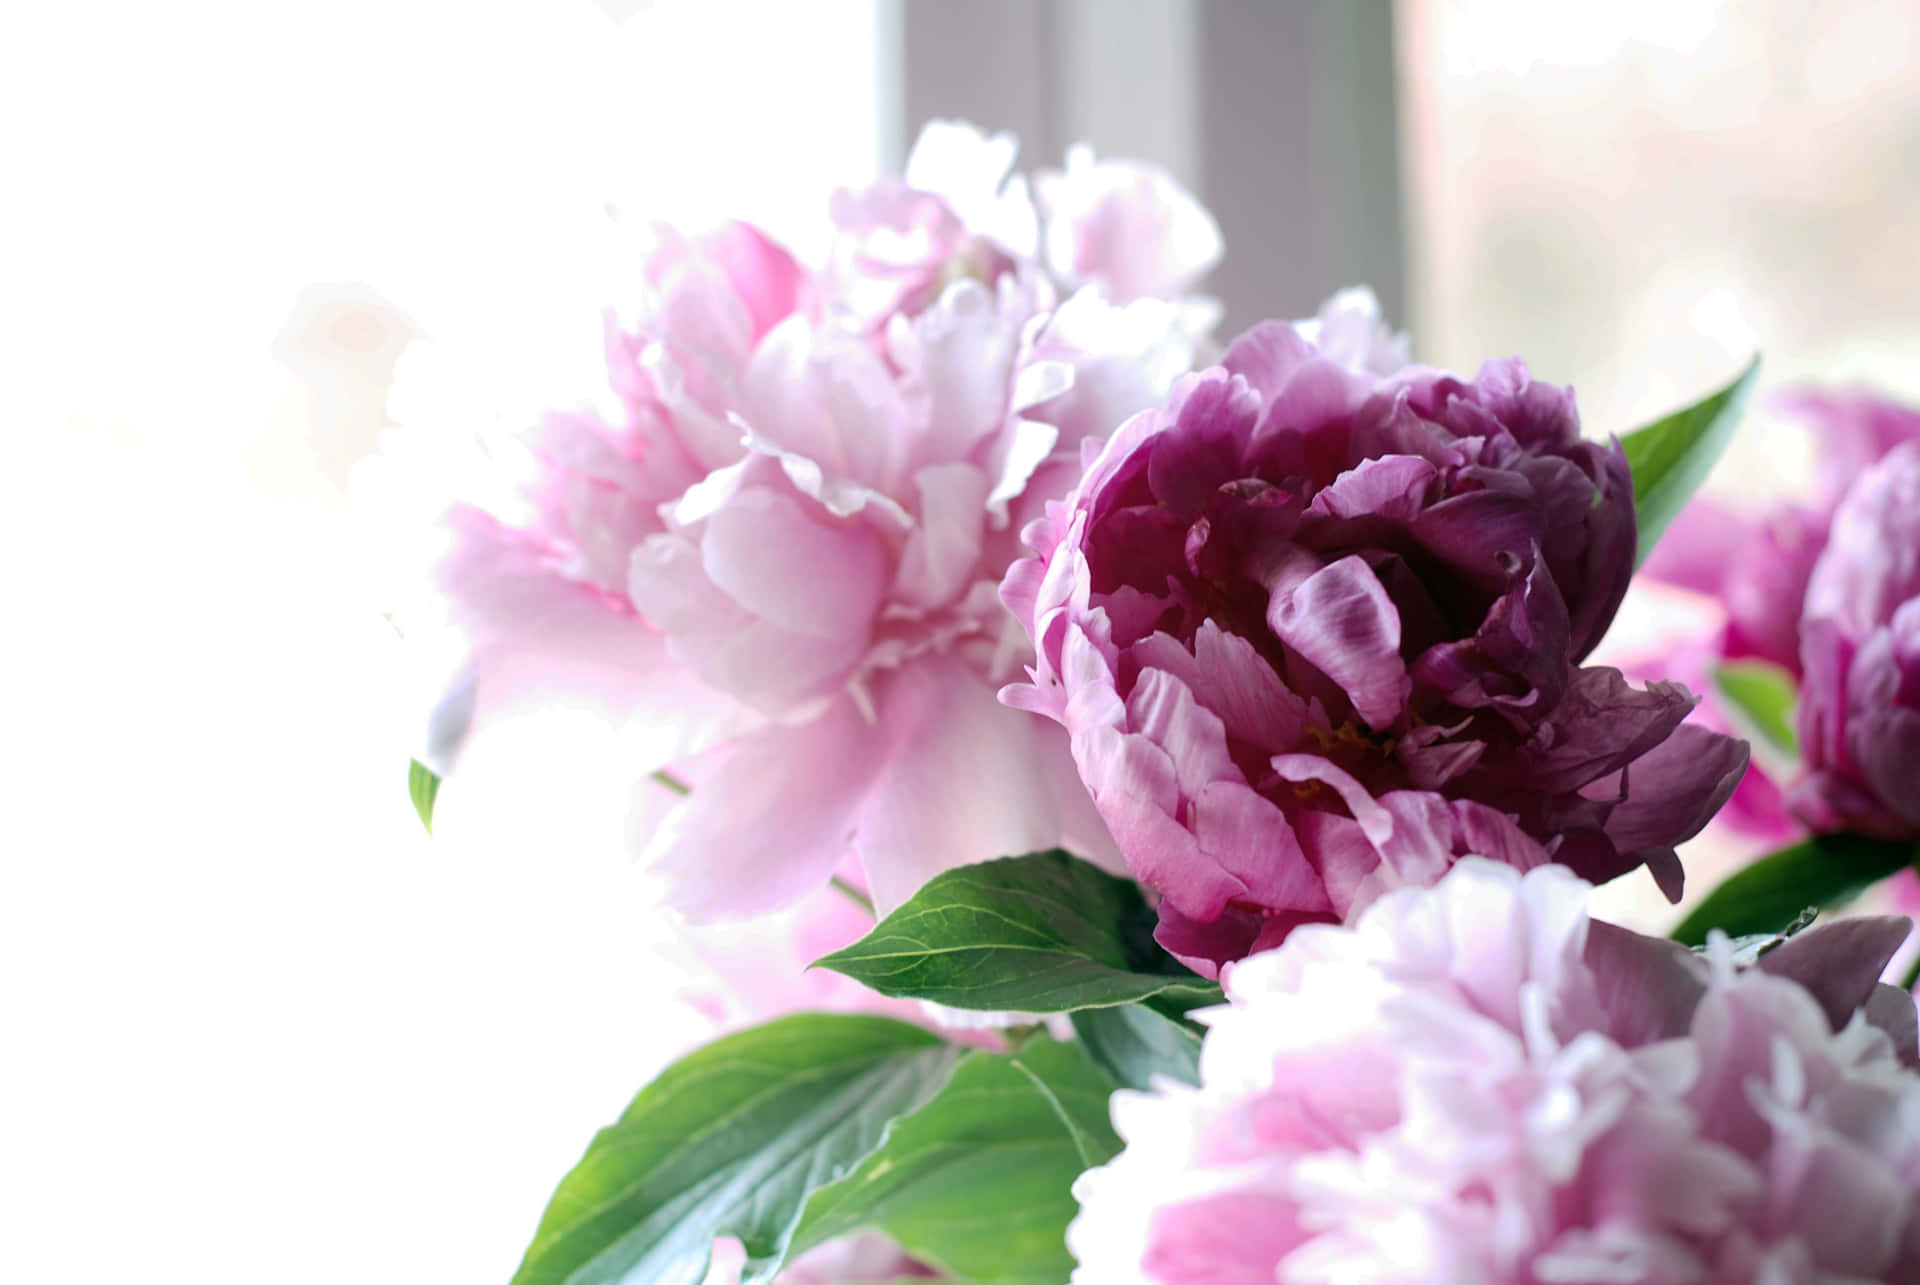 Image  A Peony Blossom Blooming